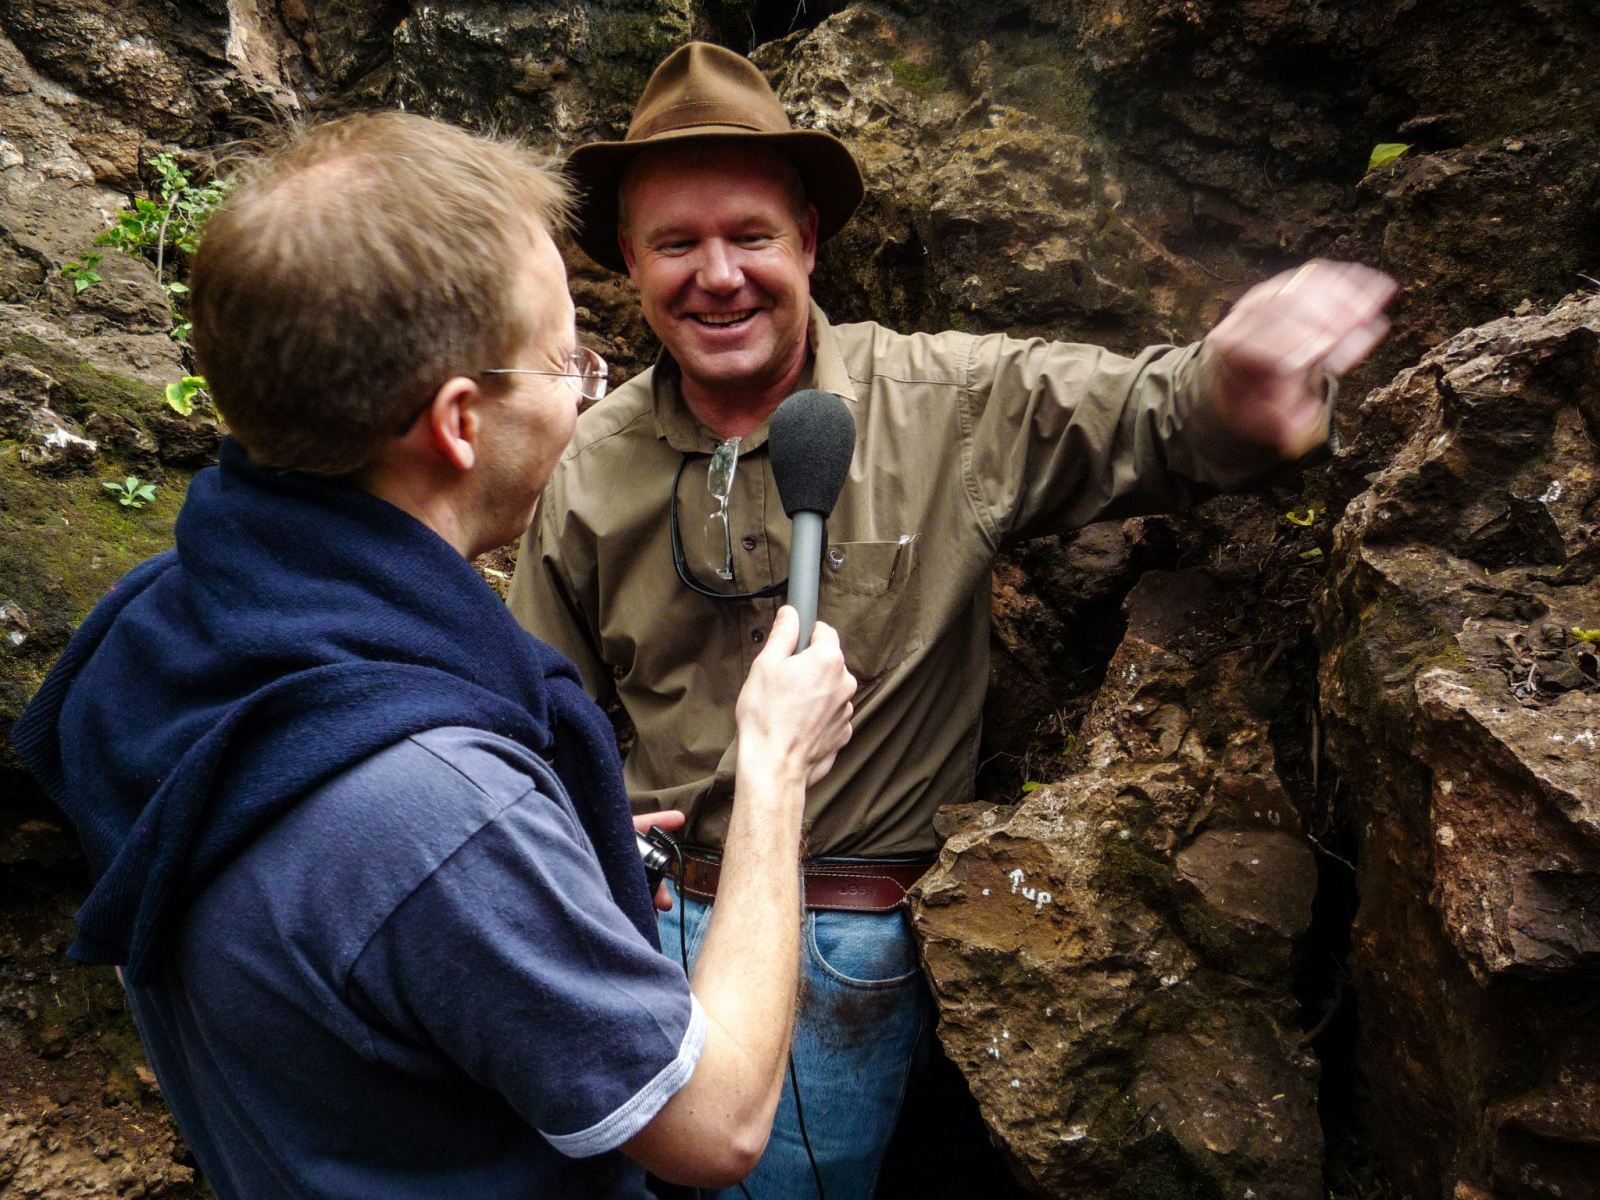 Chris Smith interviews Professor Lee Berger in the Malapa cave